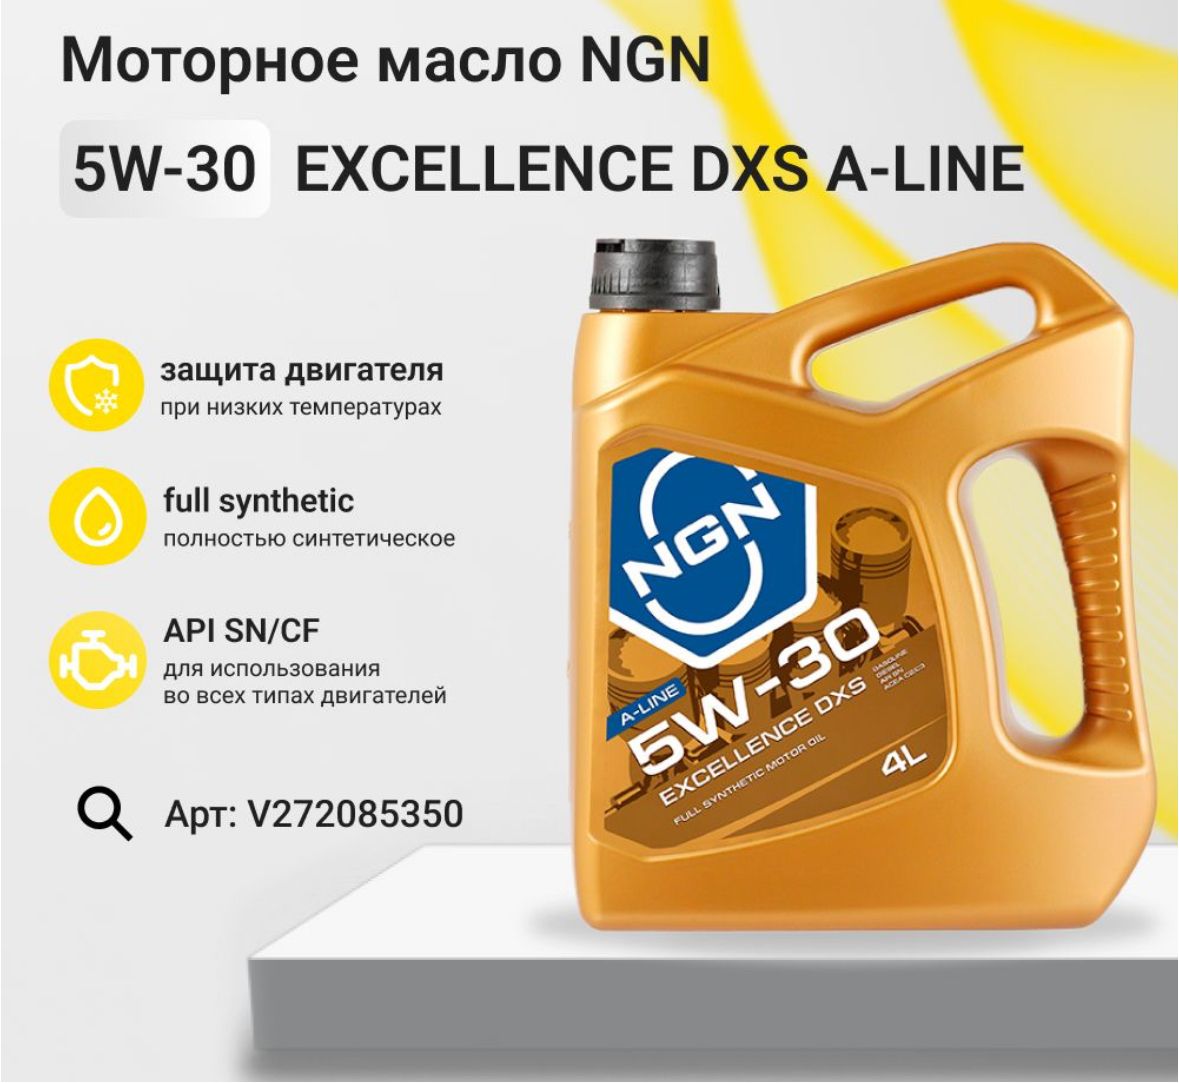 Масло ngn 5w 30. NGN 5w30 Profi 4 l. NGN Excellence DXS 5w-30. Моторное масло NGN 5w30. NGN 5w-30 Excellence DXS A-line SN/CF 4л (синт. Мотор. Масло).